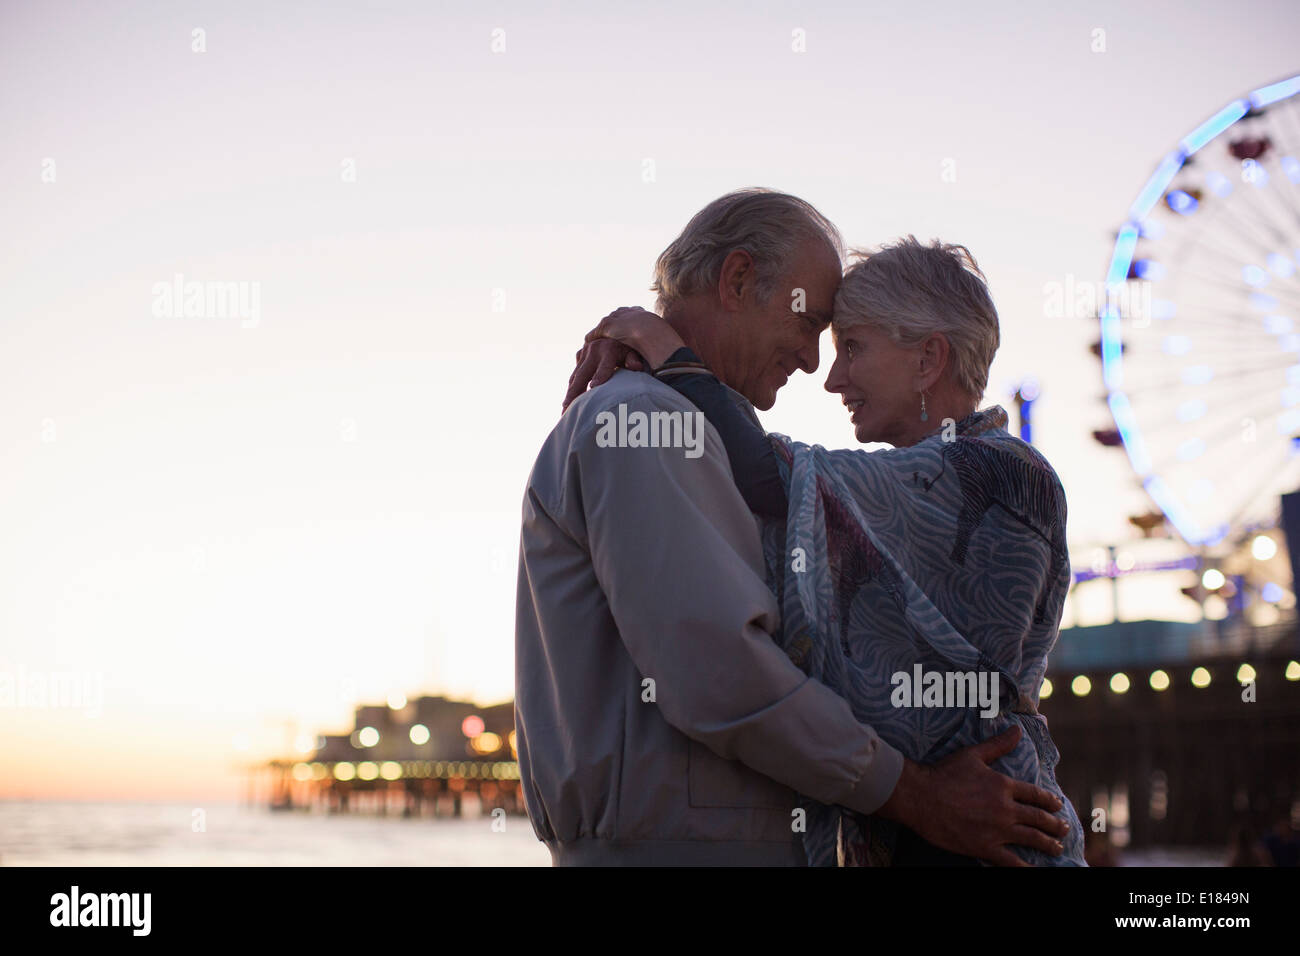 Senior couple hugging on beach at sunset Banque D'Images